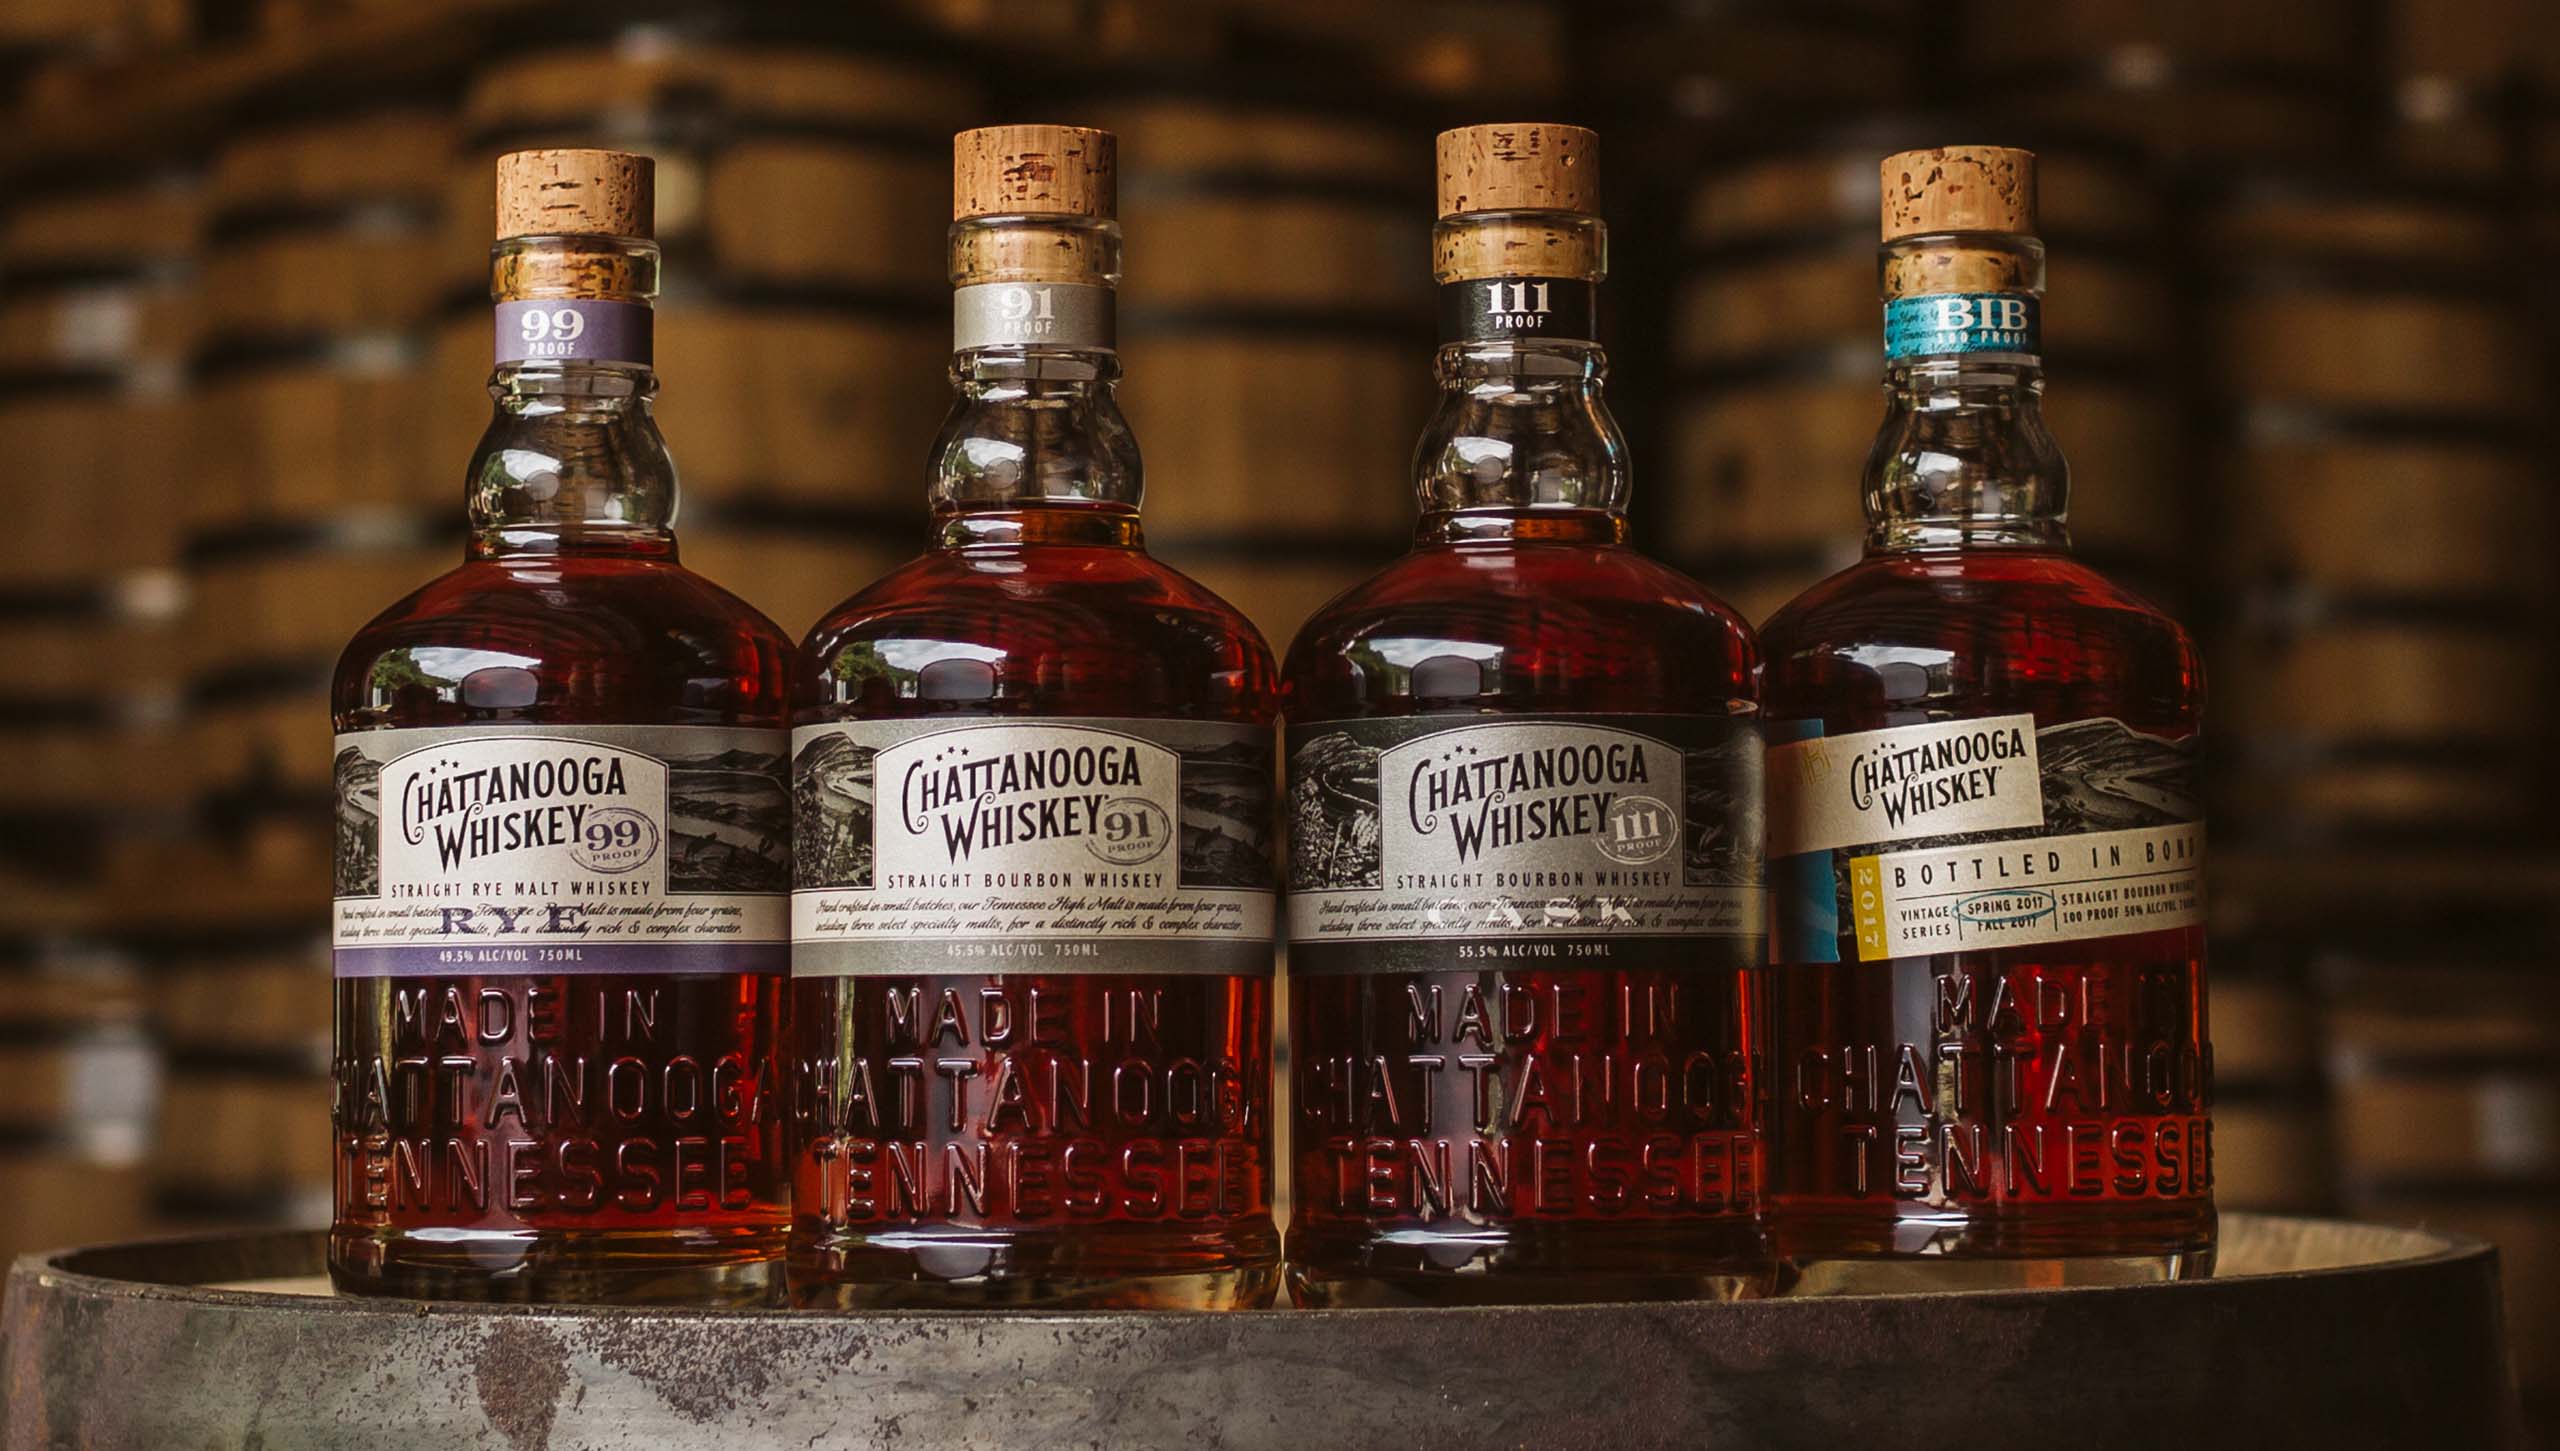 Men's Journal: 10 American Whiskey Brands That Deserve Your Unrequited Love